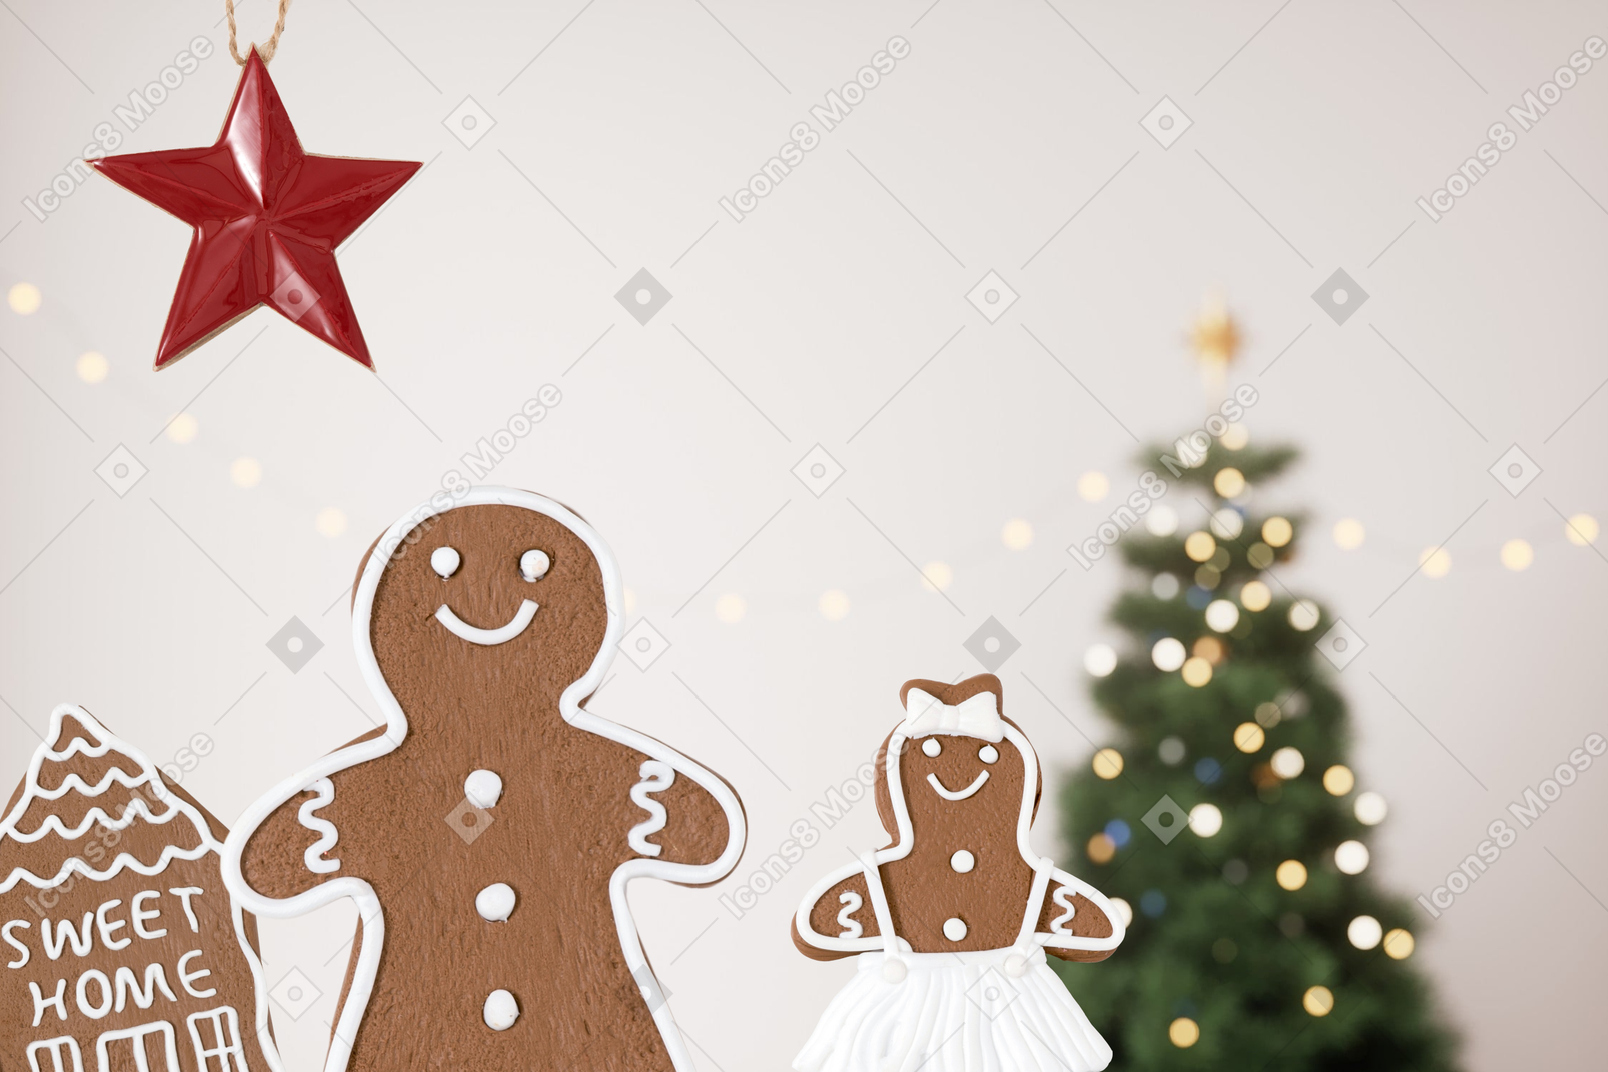 Gingerbread cookies with chtistmas tree and ornaments